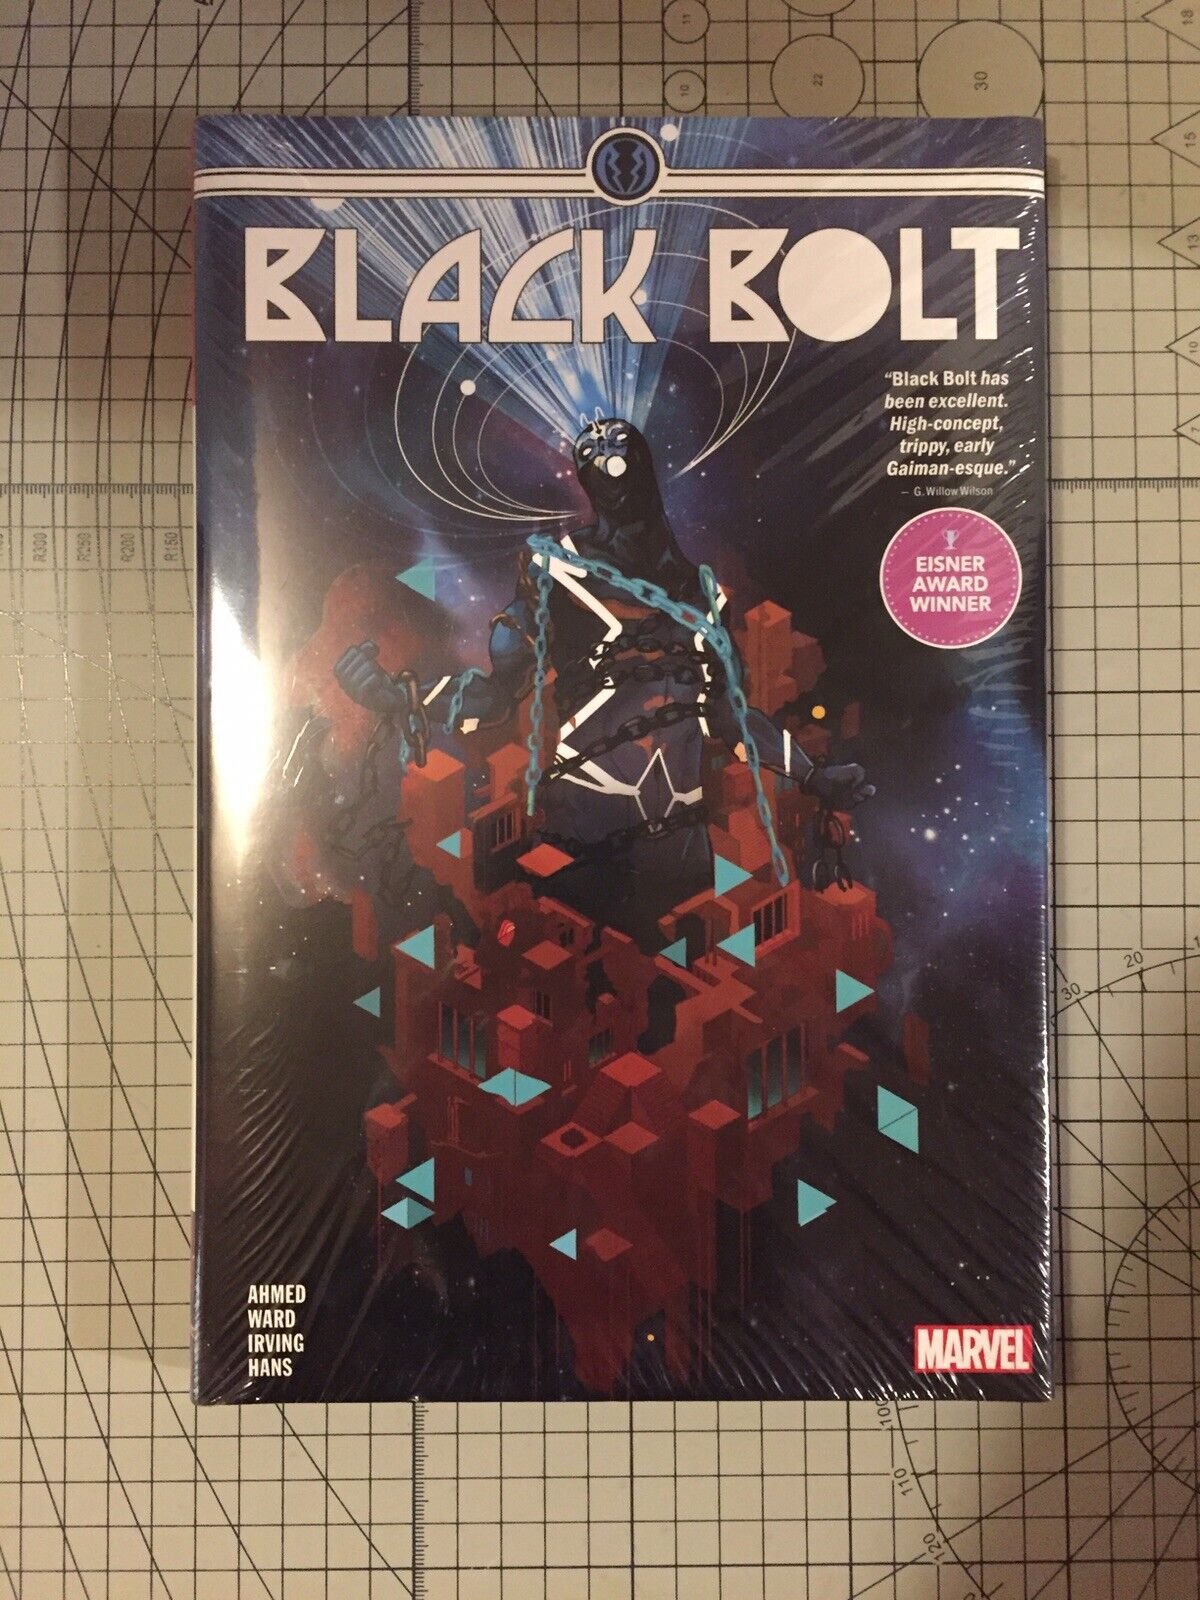 Black Bolt By Saladin Ahmed Deluxe Hardcover NEW SEALED Please Read Description